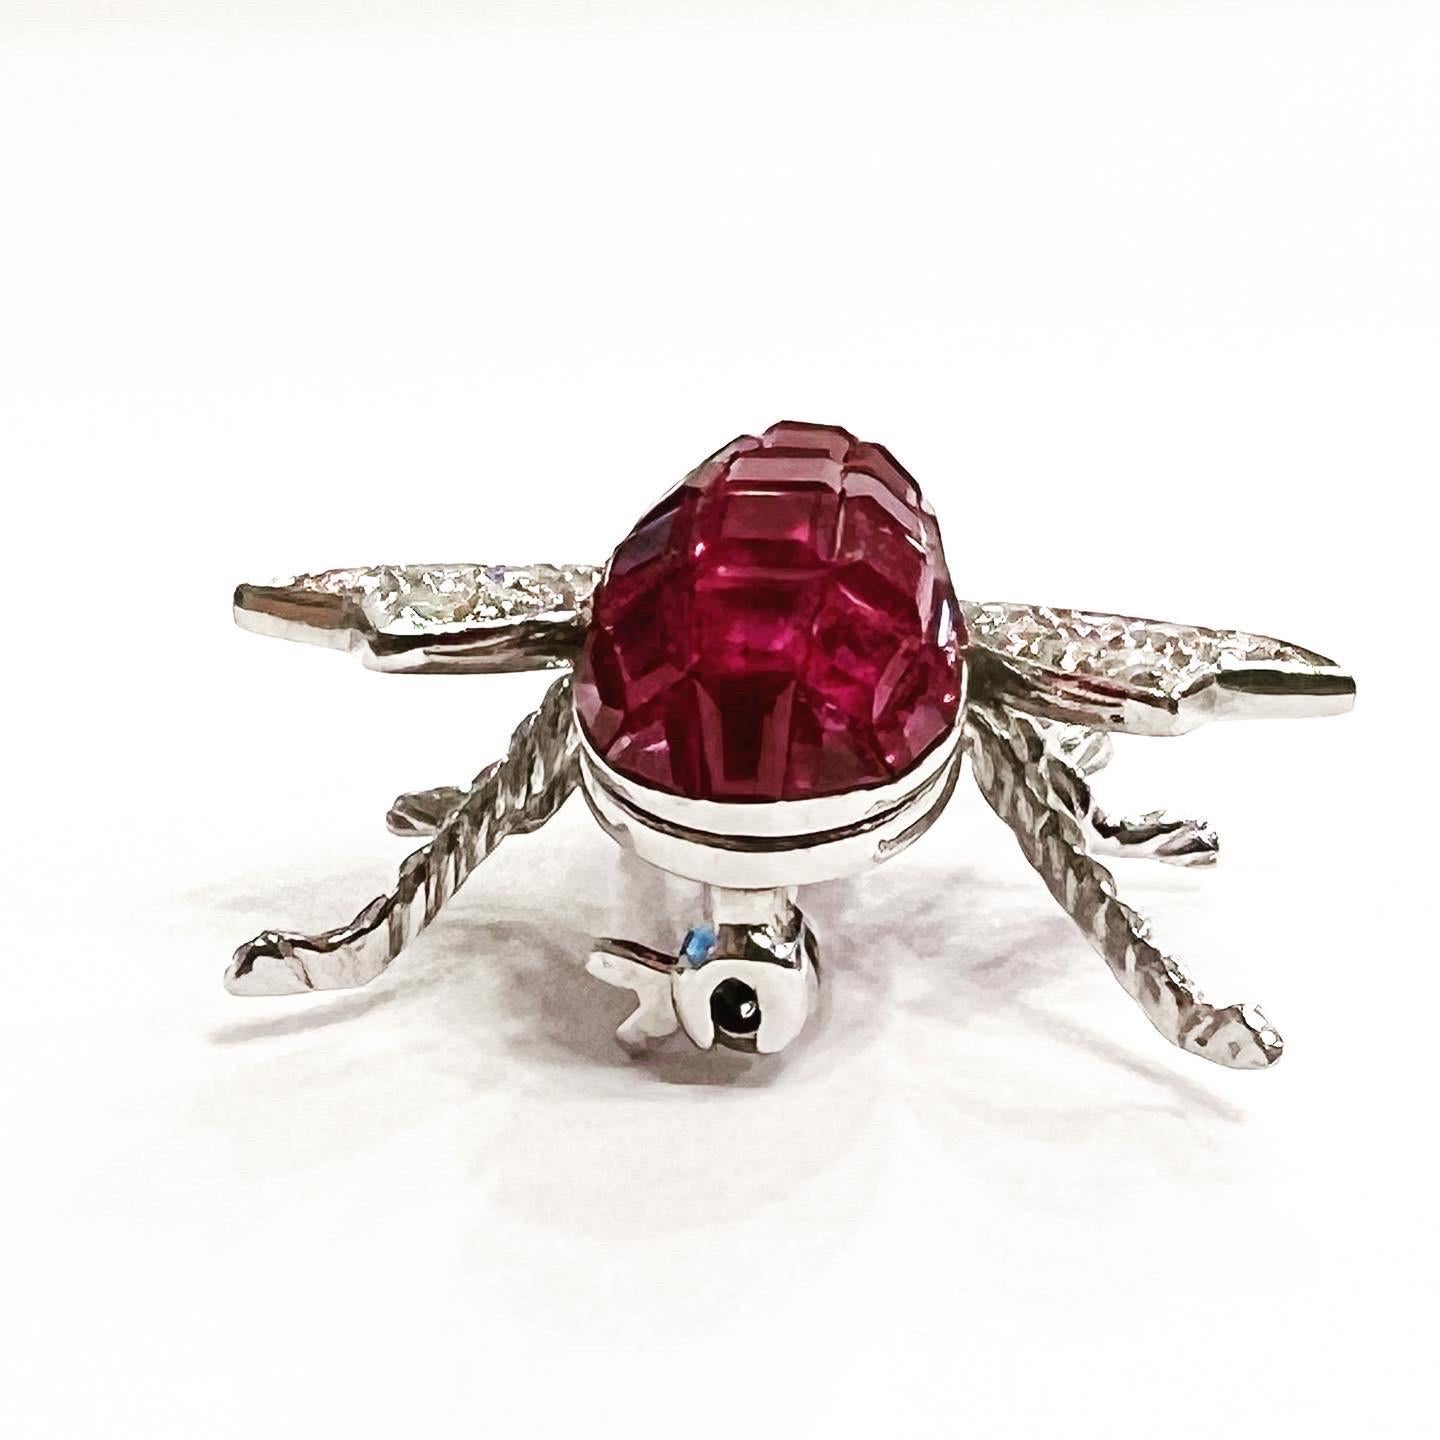  18k White Gold, Pavé Setting Ruby Diamond Fly Bee Brooch In Excellent Condition For Sale In Pamplona, Navarra